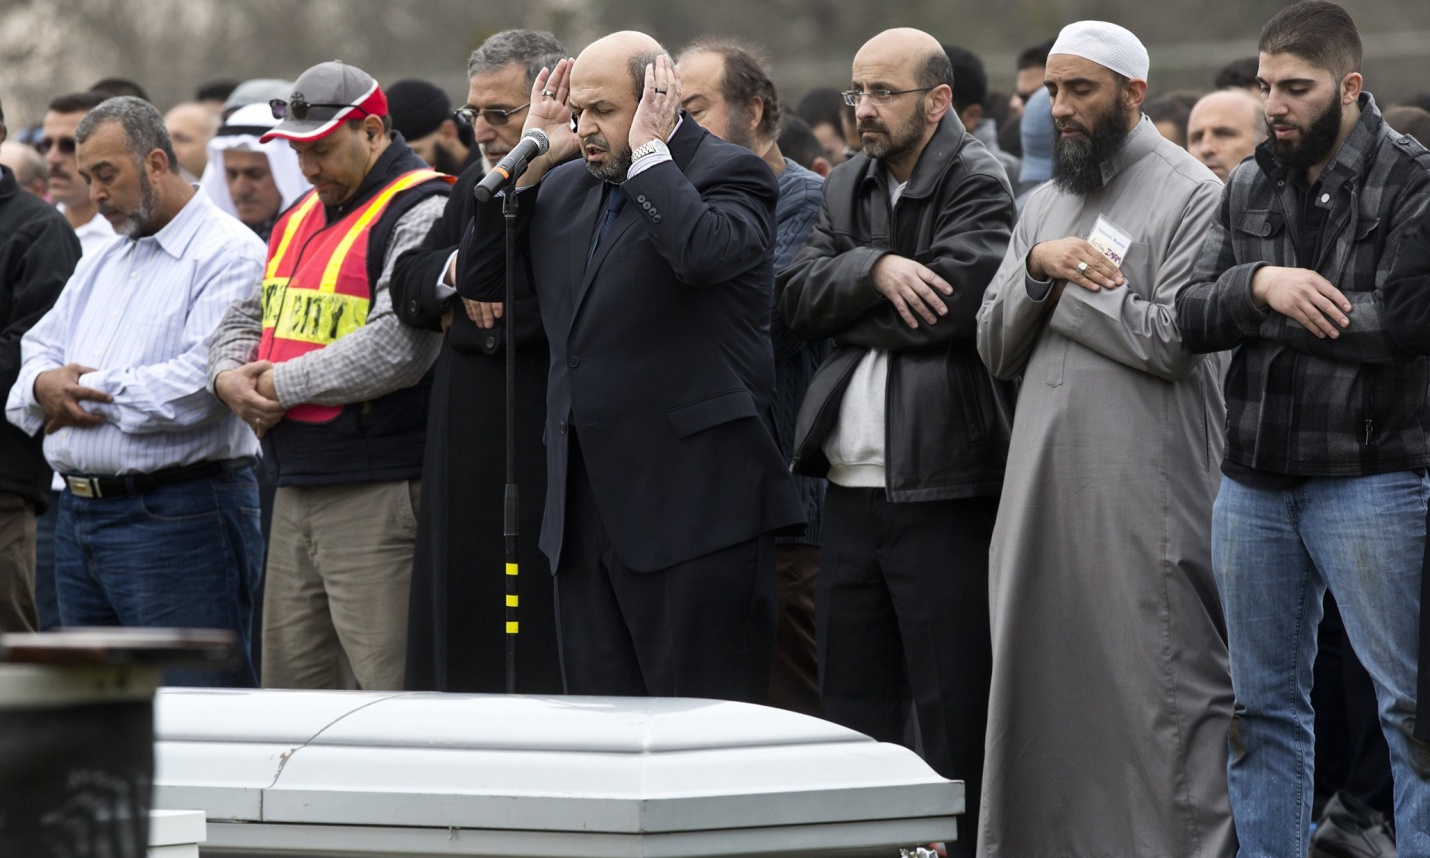 Thousands attend funeral for Muslim students shot in Chapel Hill